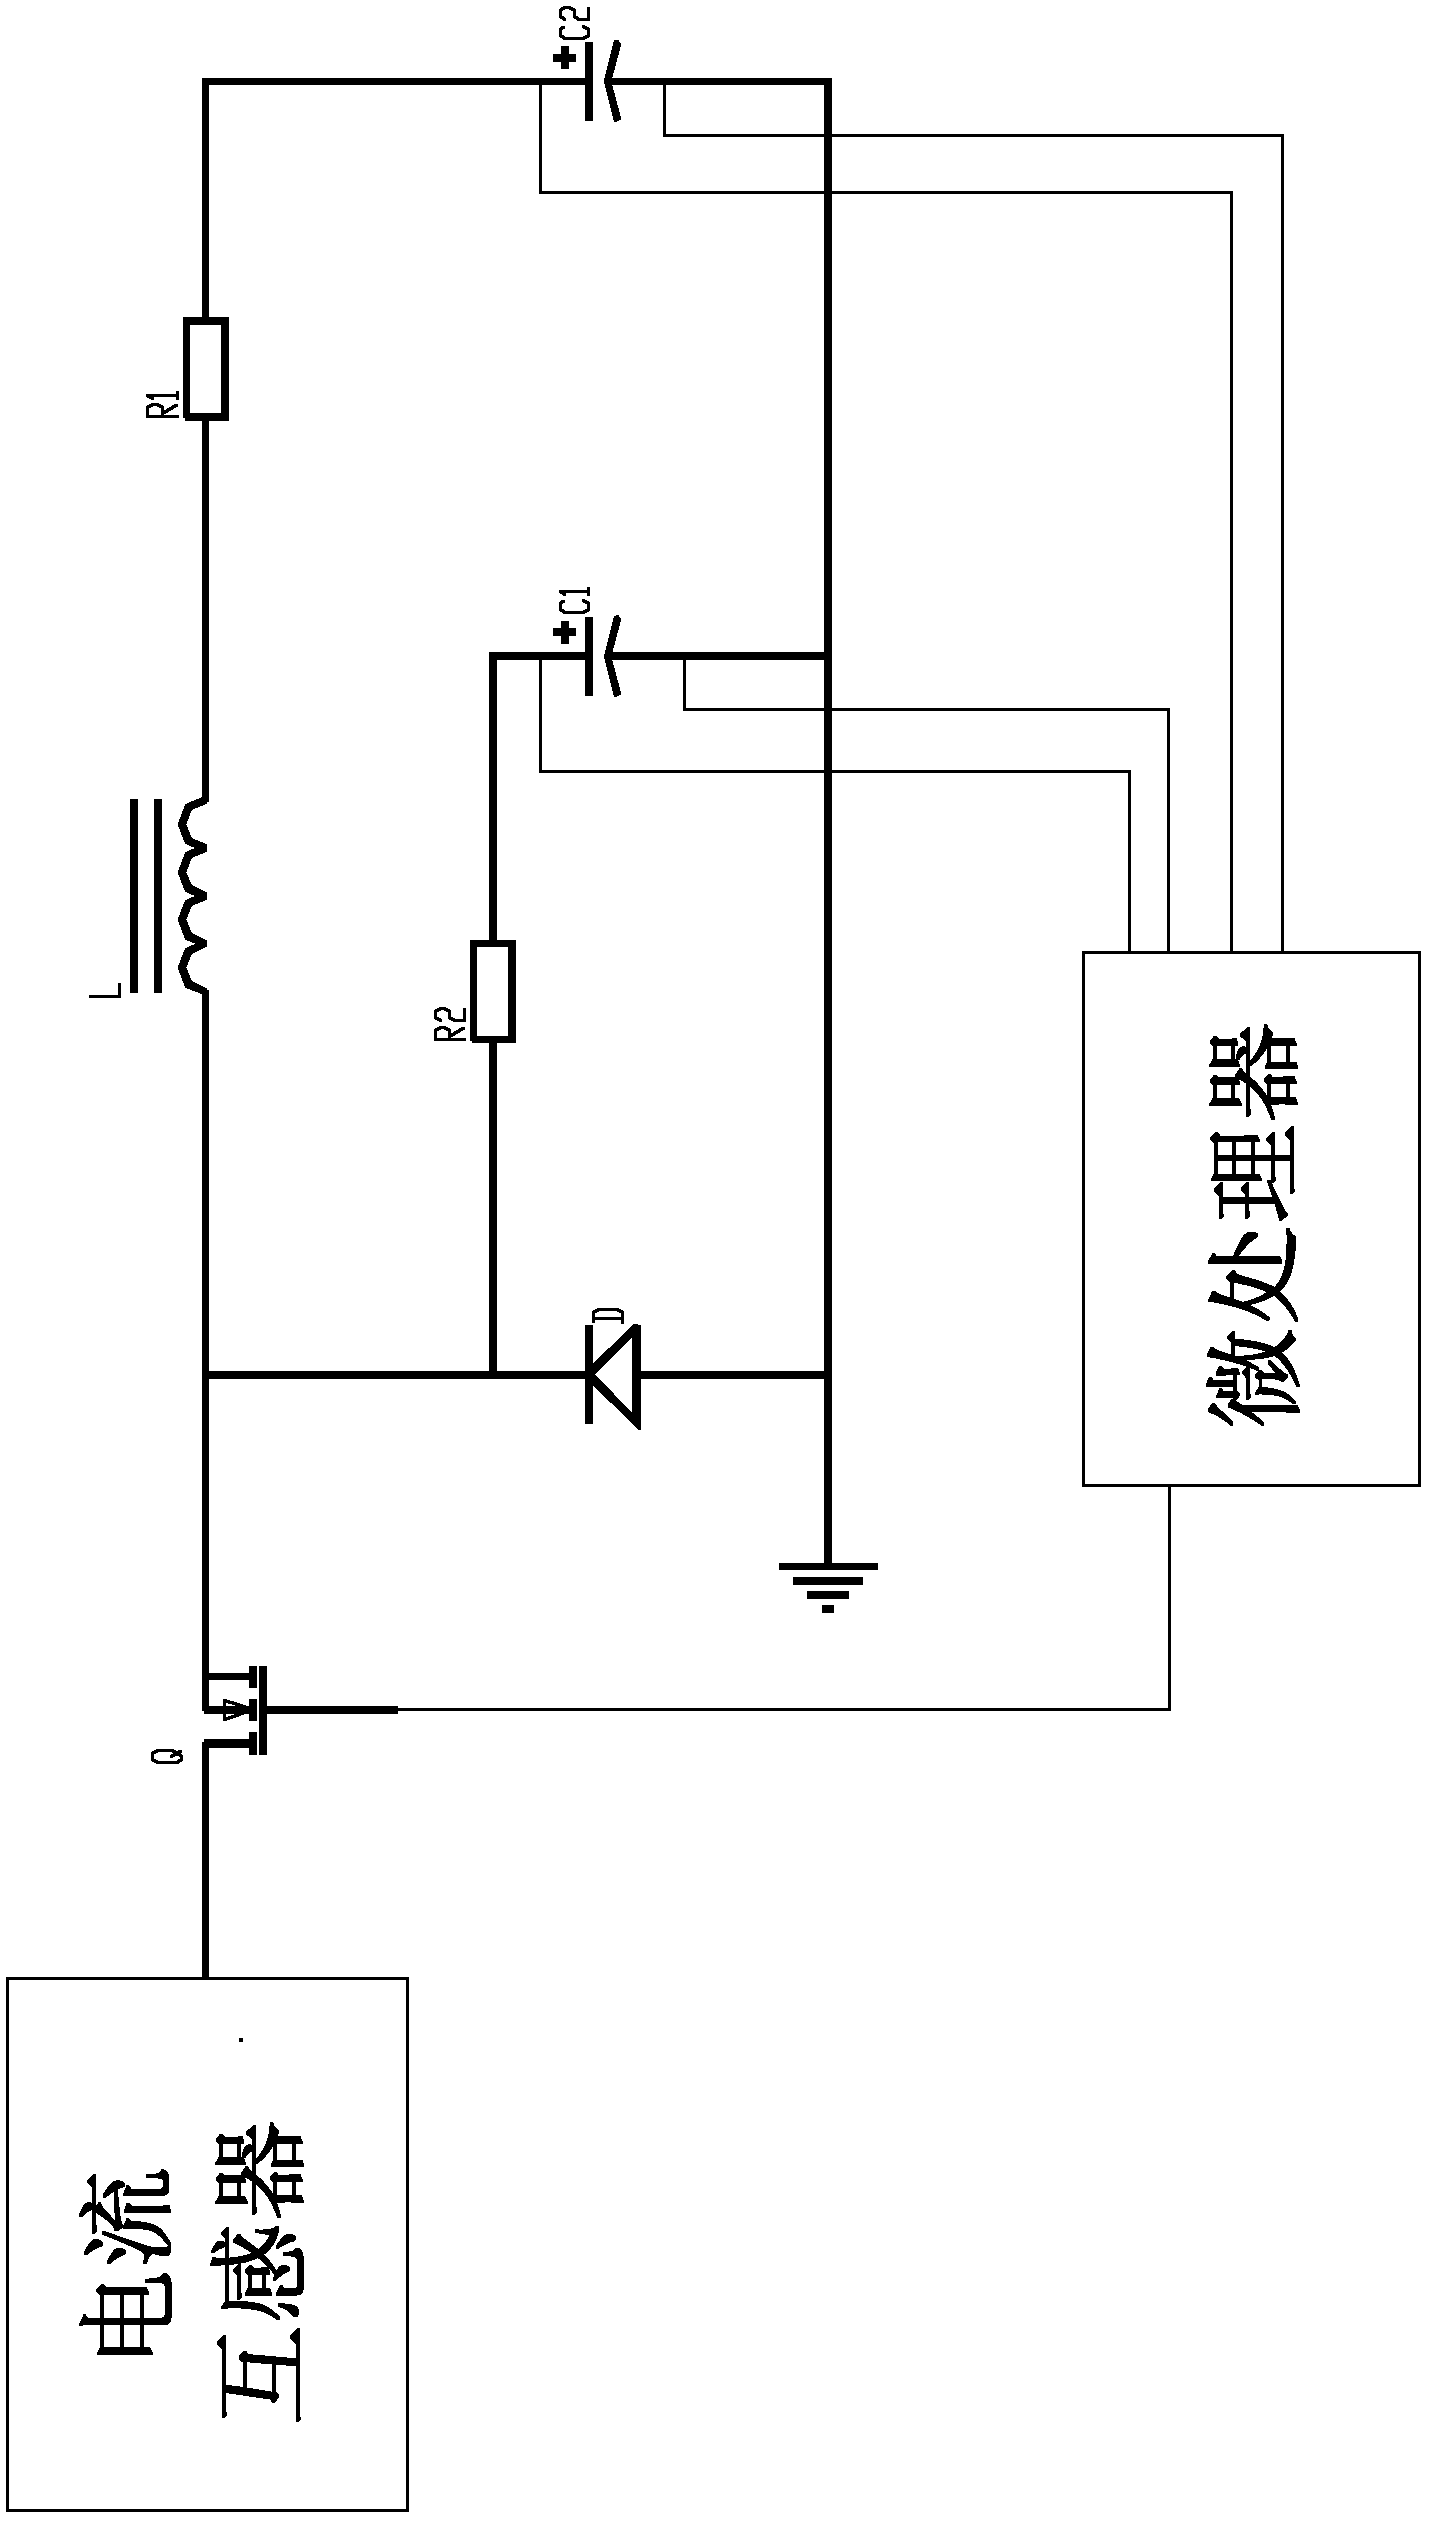 Signal acquisition device and processing method for alternating current power current-sharing output system